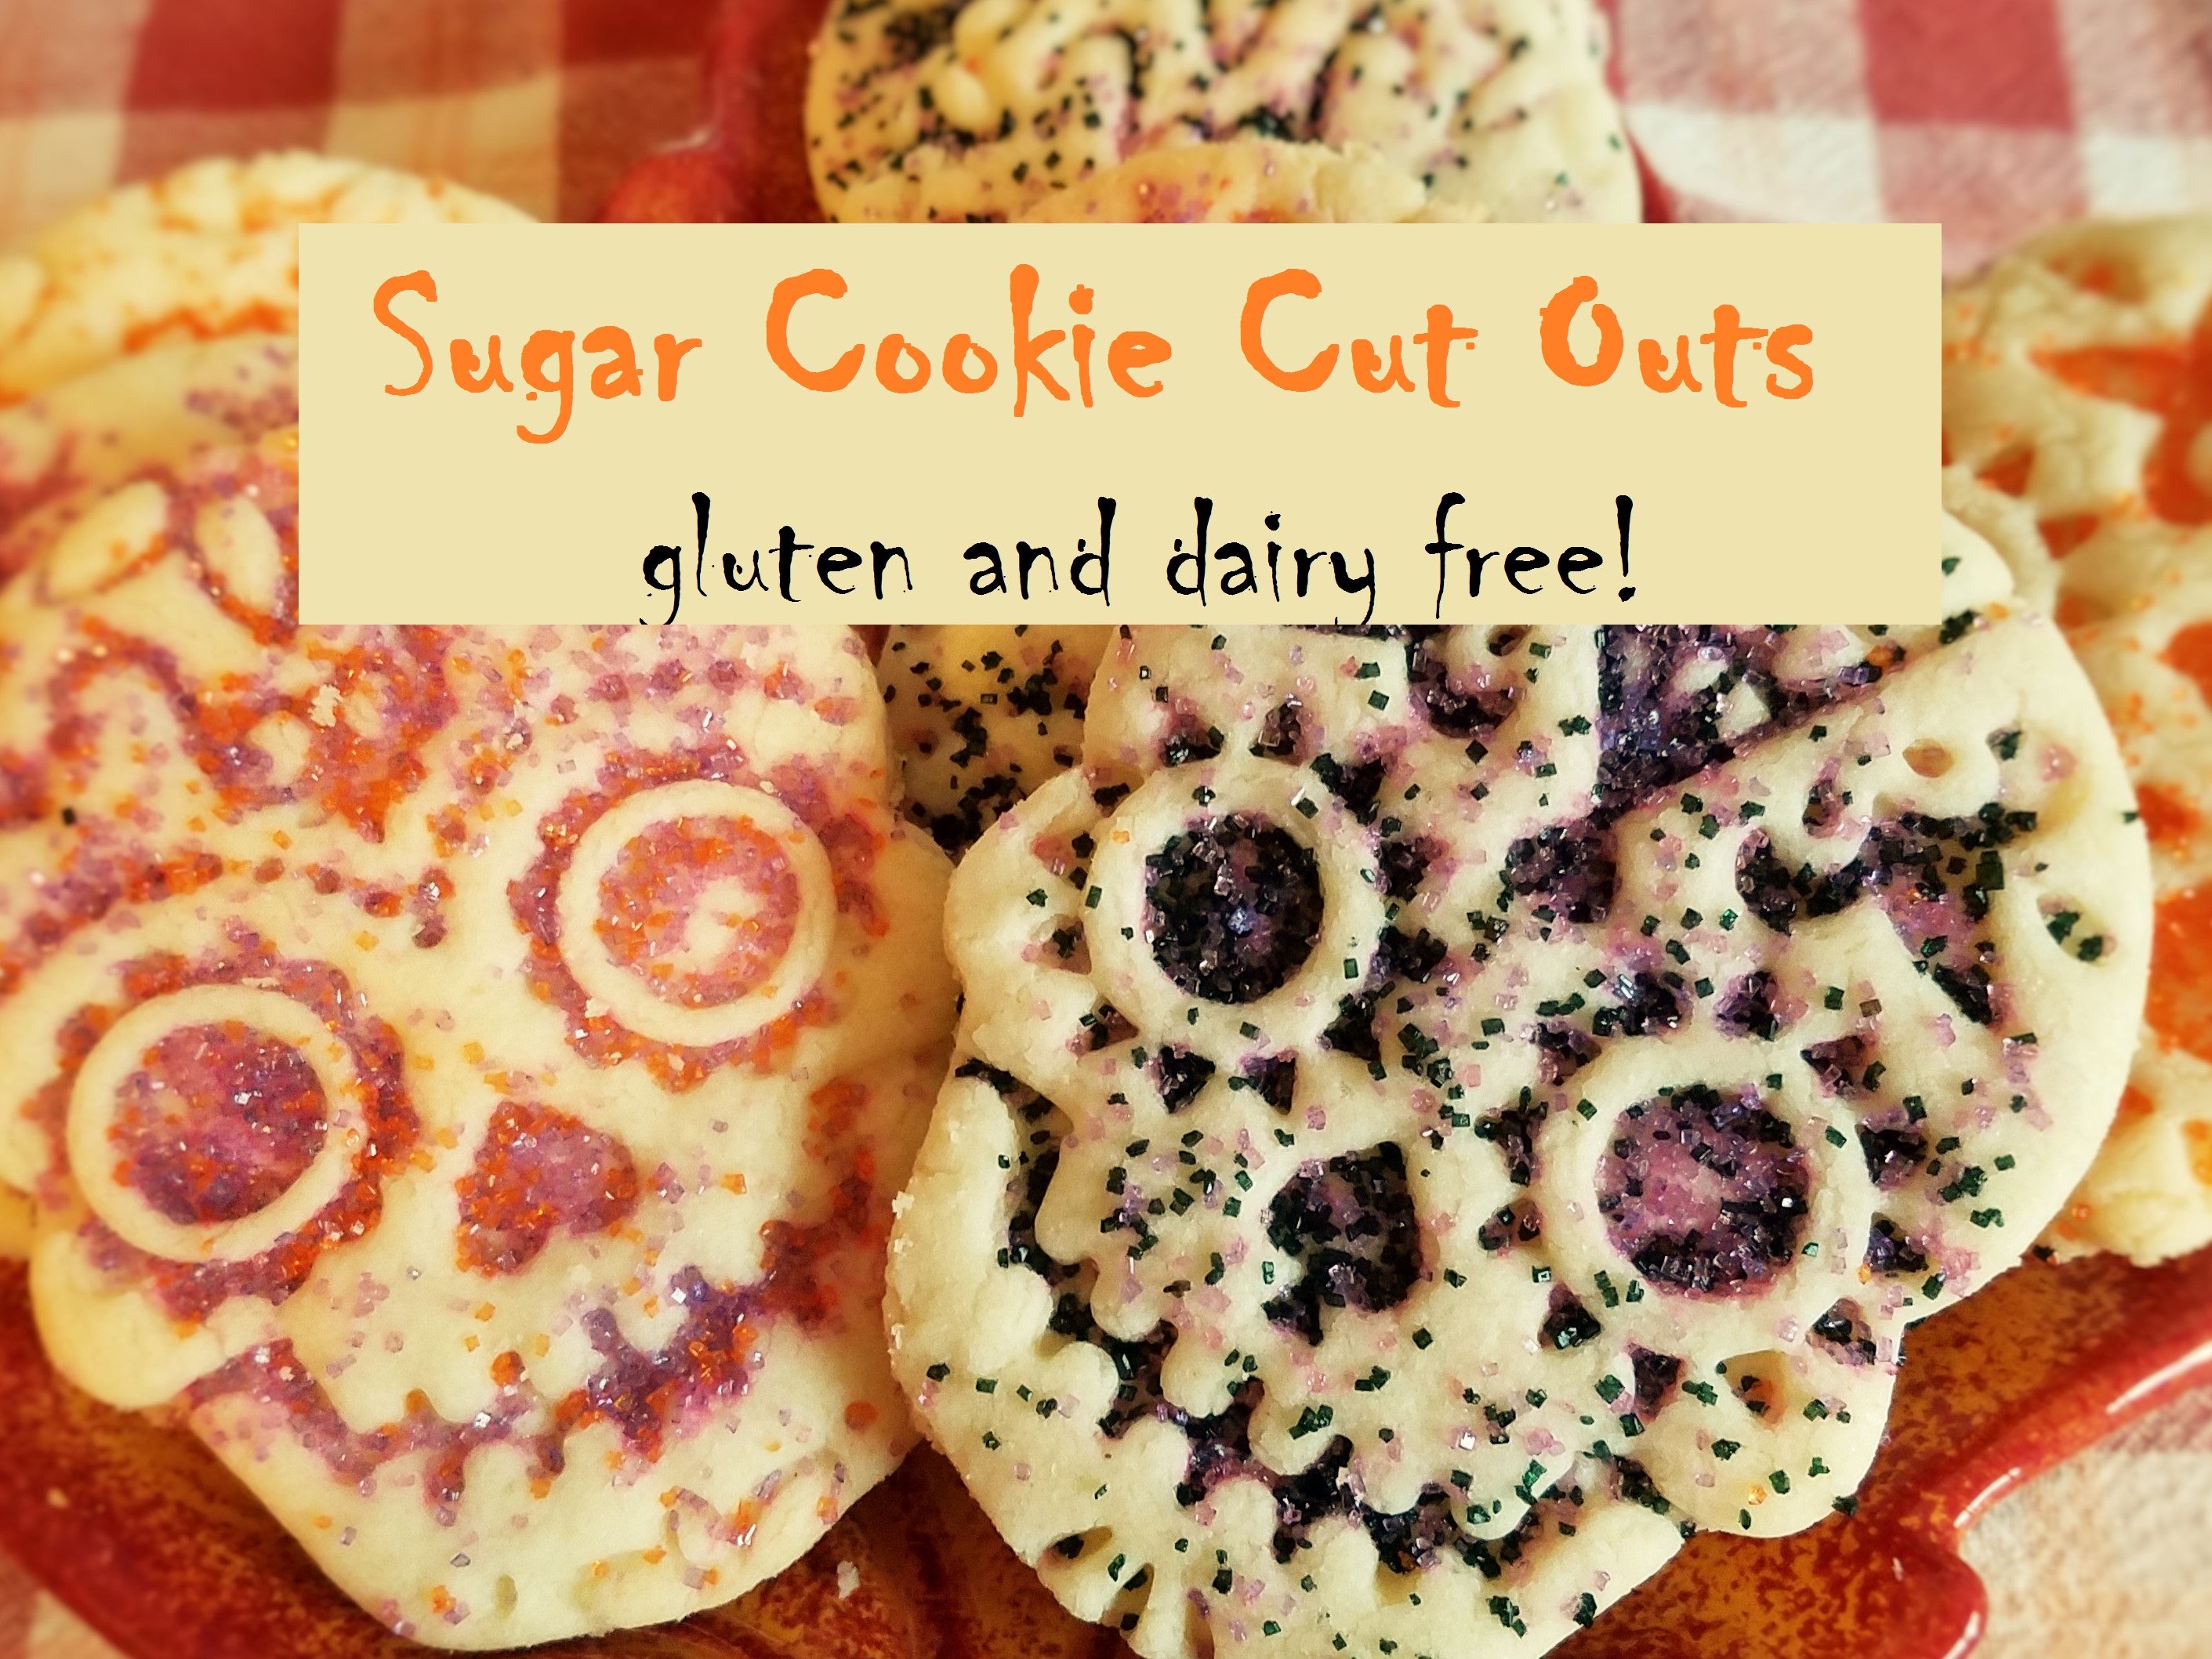 Sugar Cookie Cut-Outs – Gluten and Dairy Free!